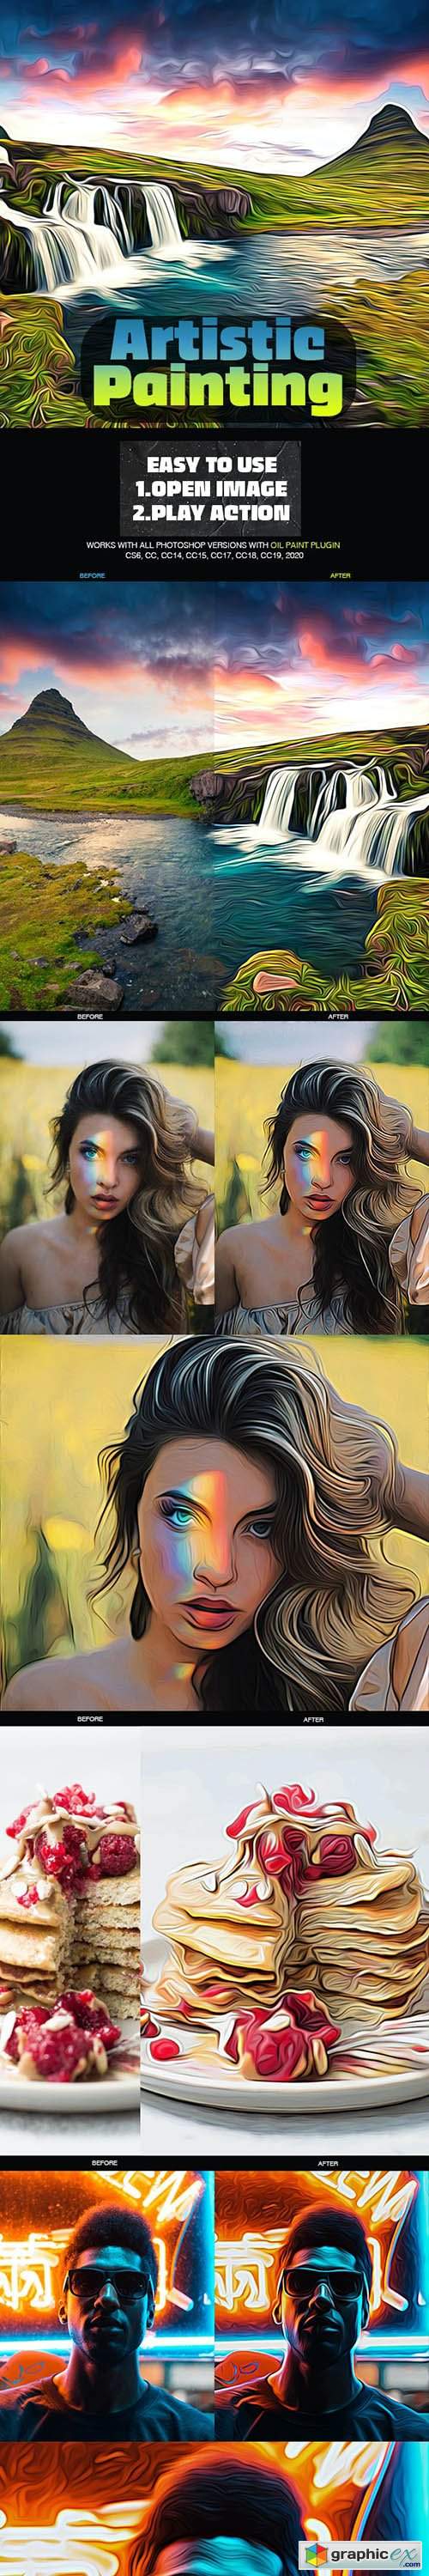  Artistic Painting Photoshop Action 26590064